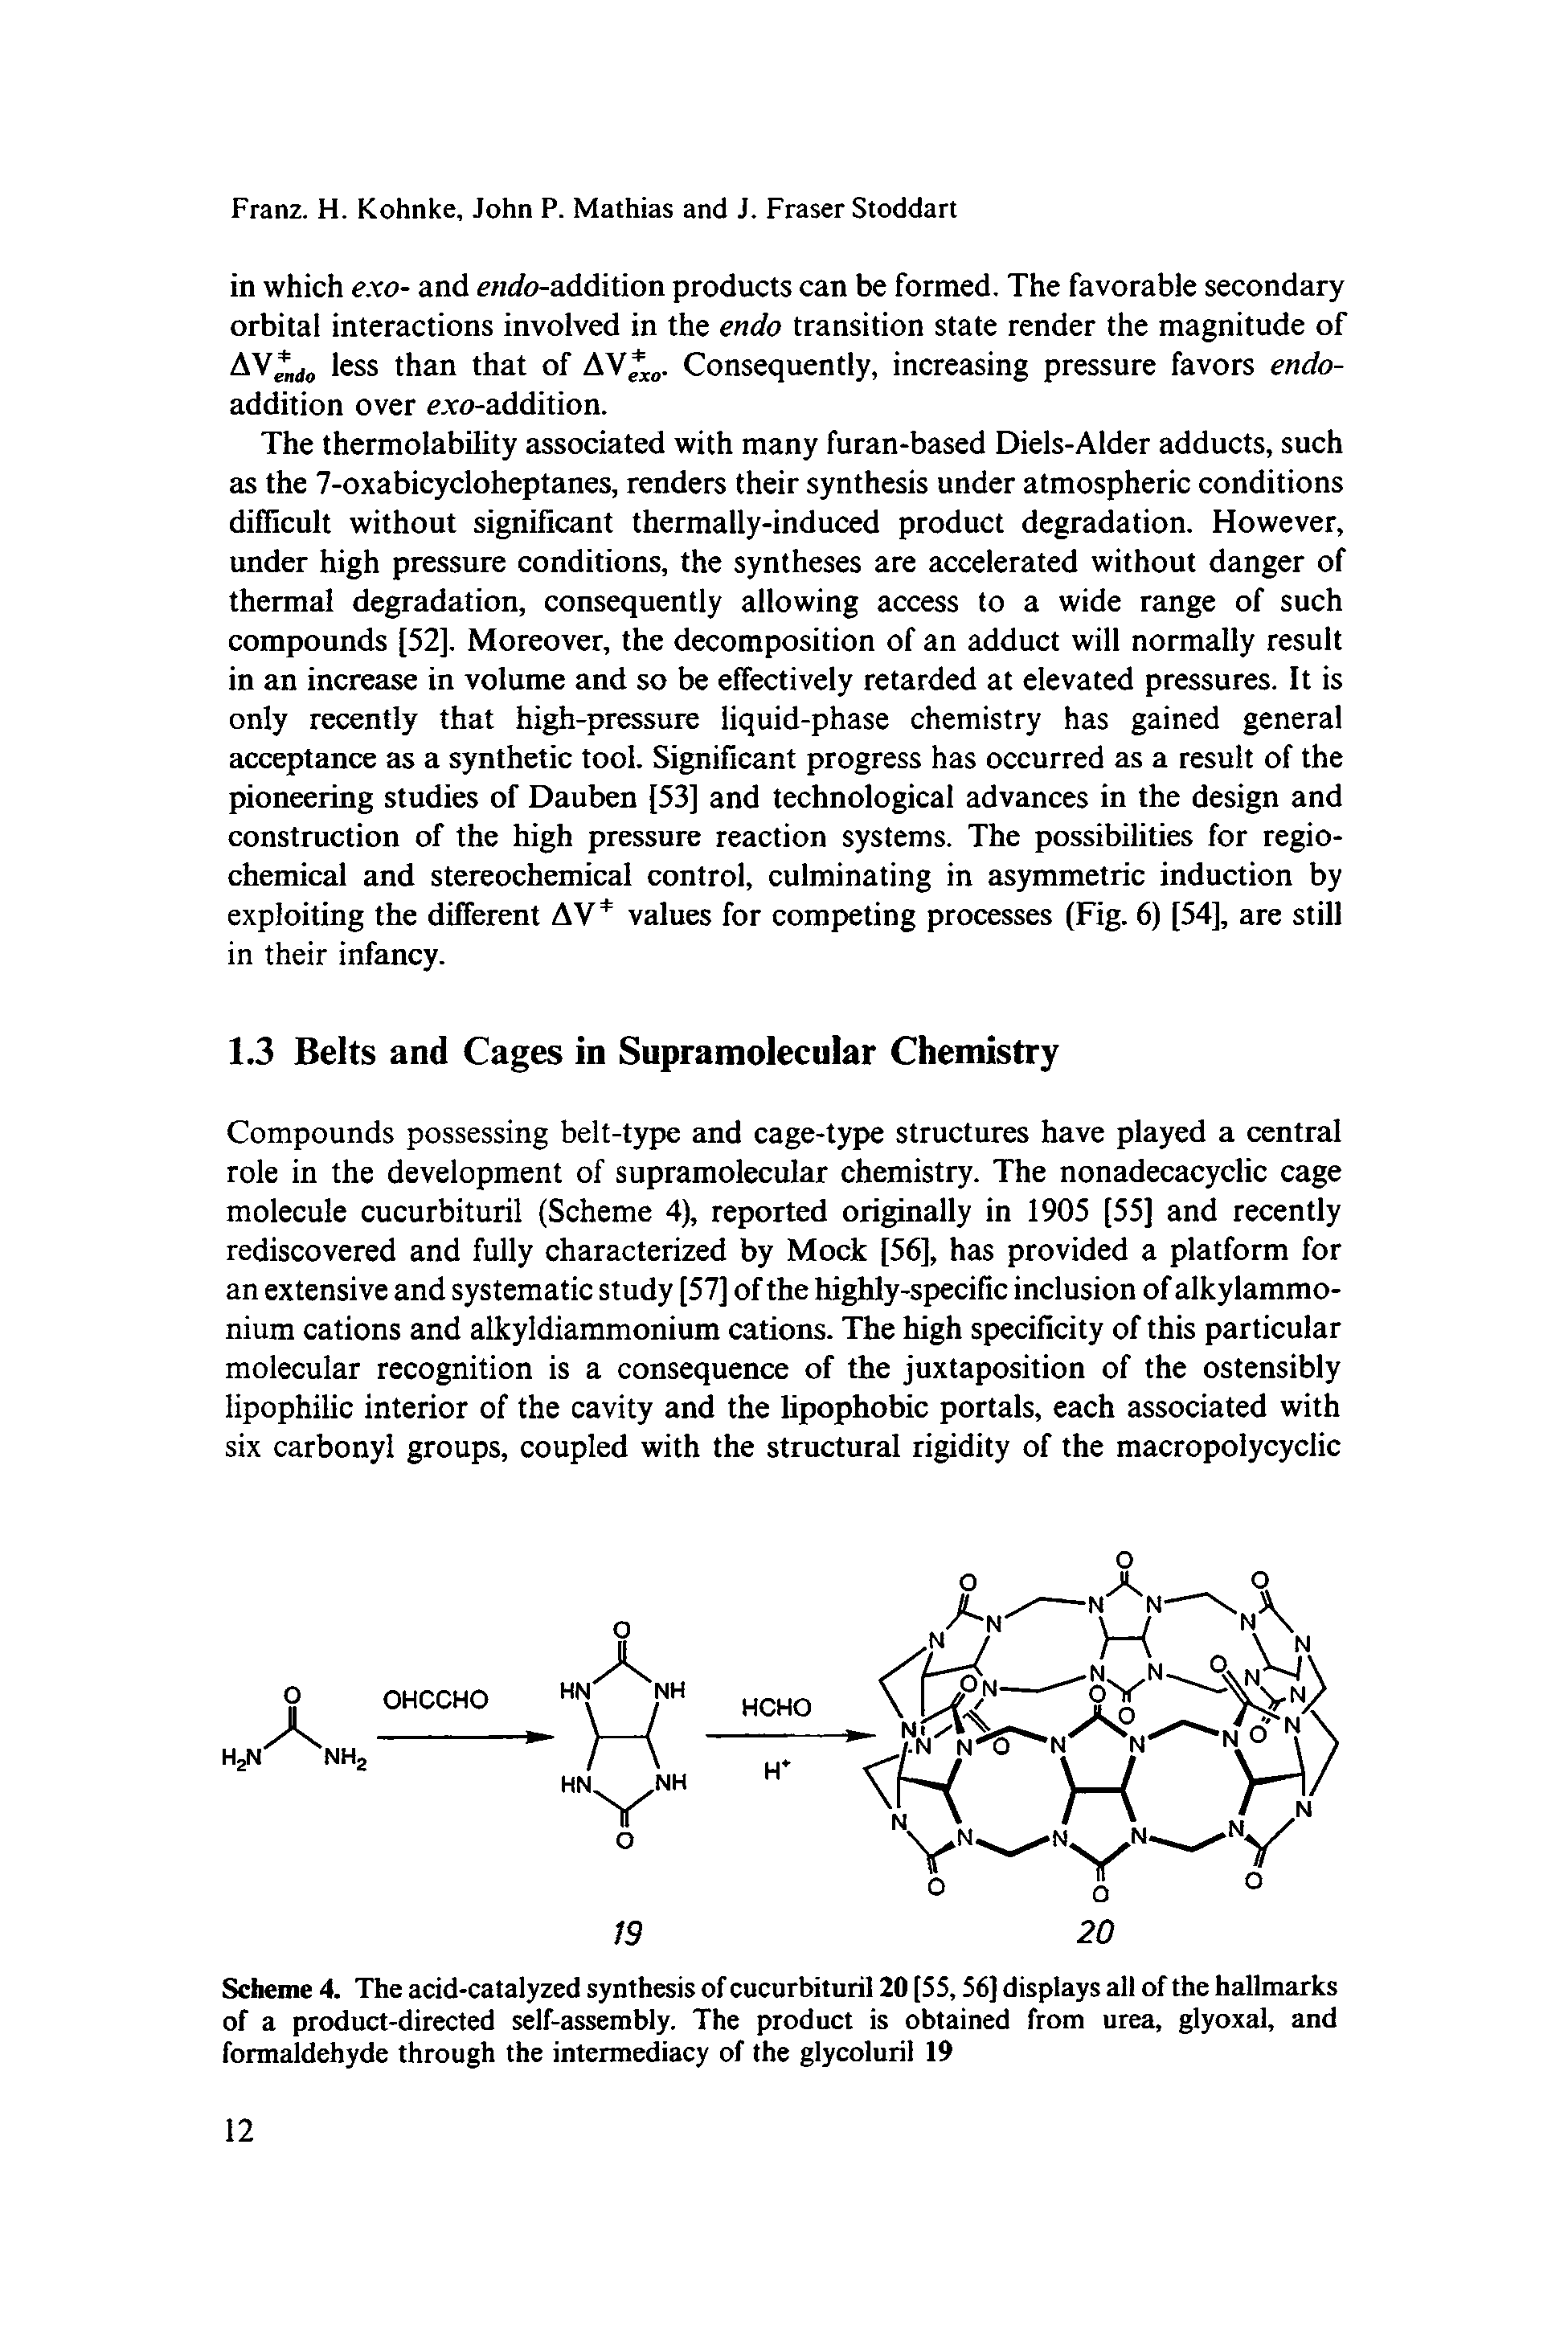 Scheme 4. The acid-catalyzed synthesis of cucurbituril 20 [55,56] displays all of the hallmarks of a product-directed self-assembly. The product is obtained from urea, glyoxal, and formaldehyde through the intermediacy of the glycoluril 19...